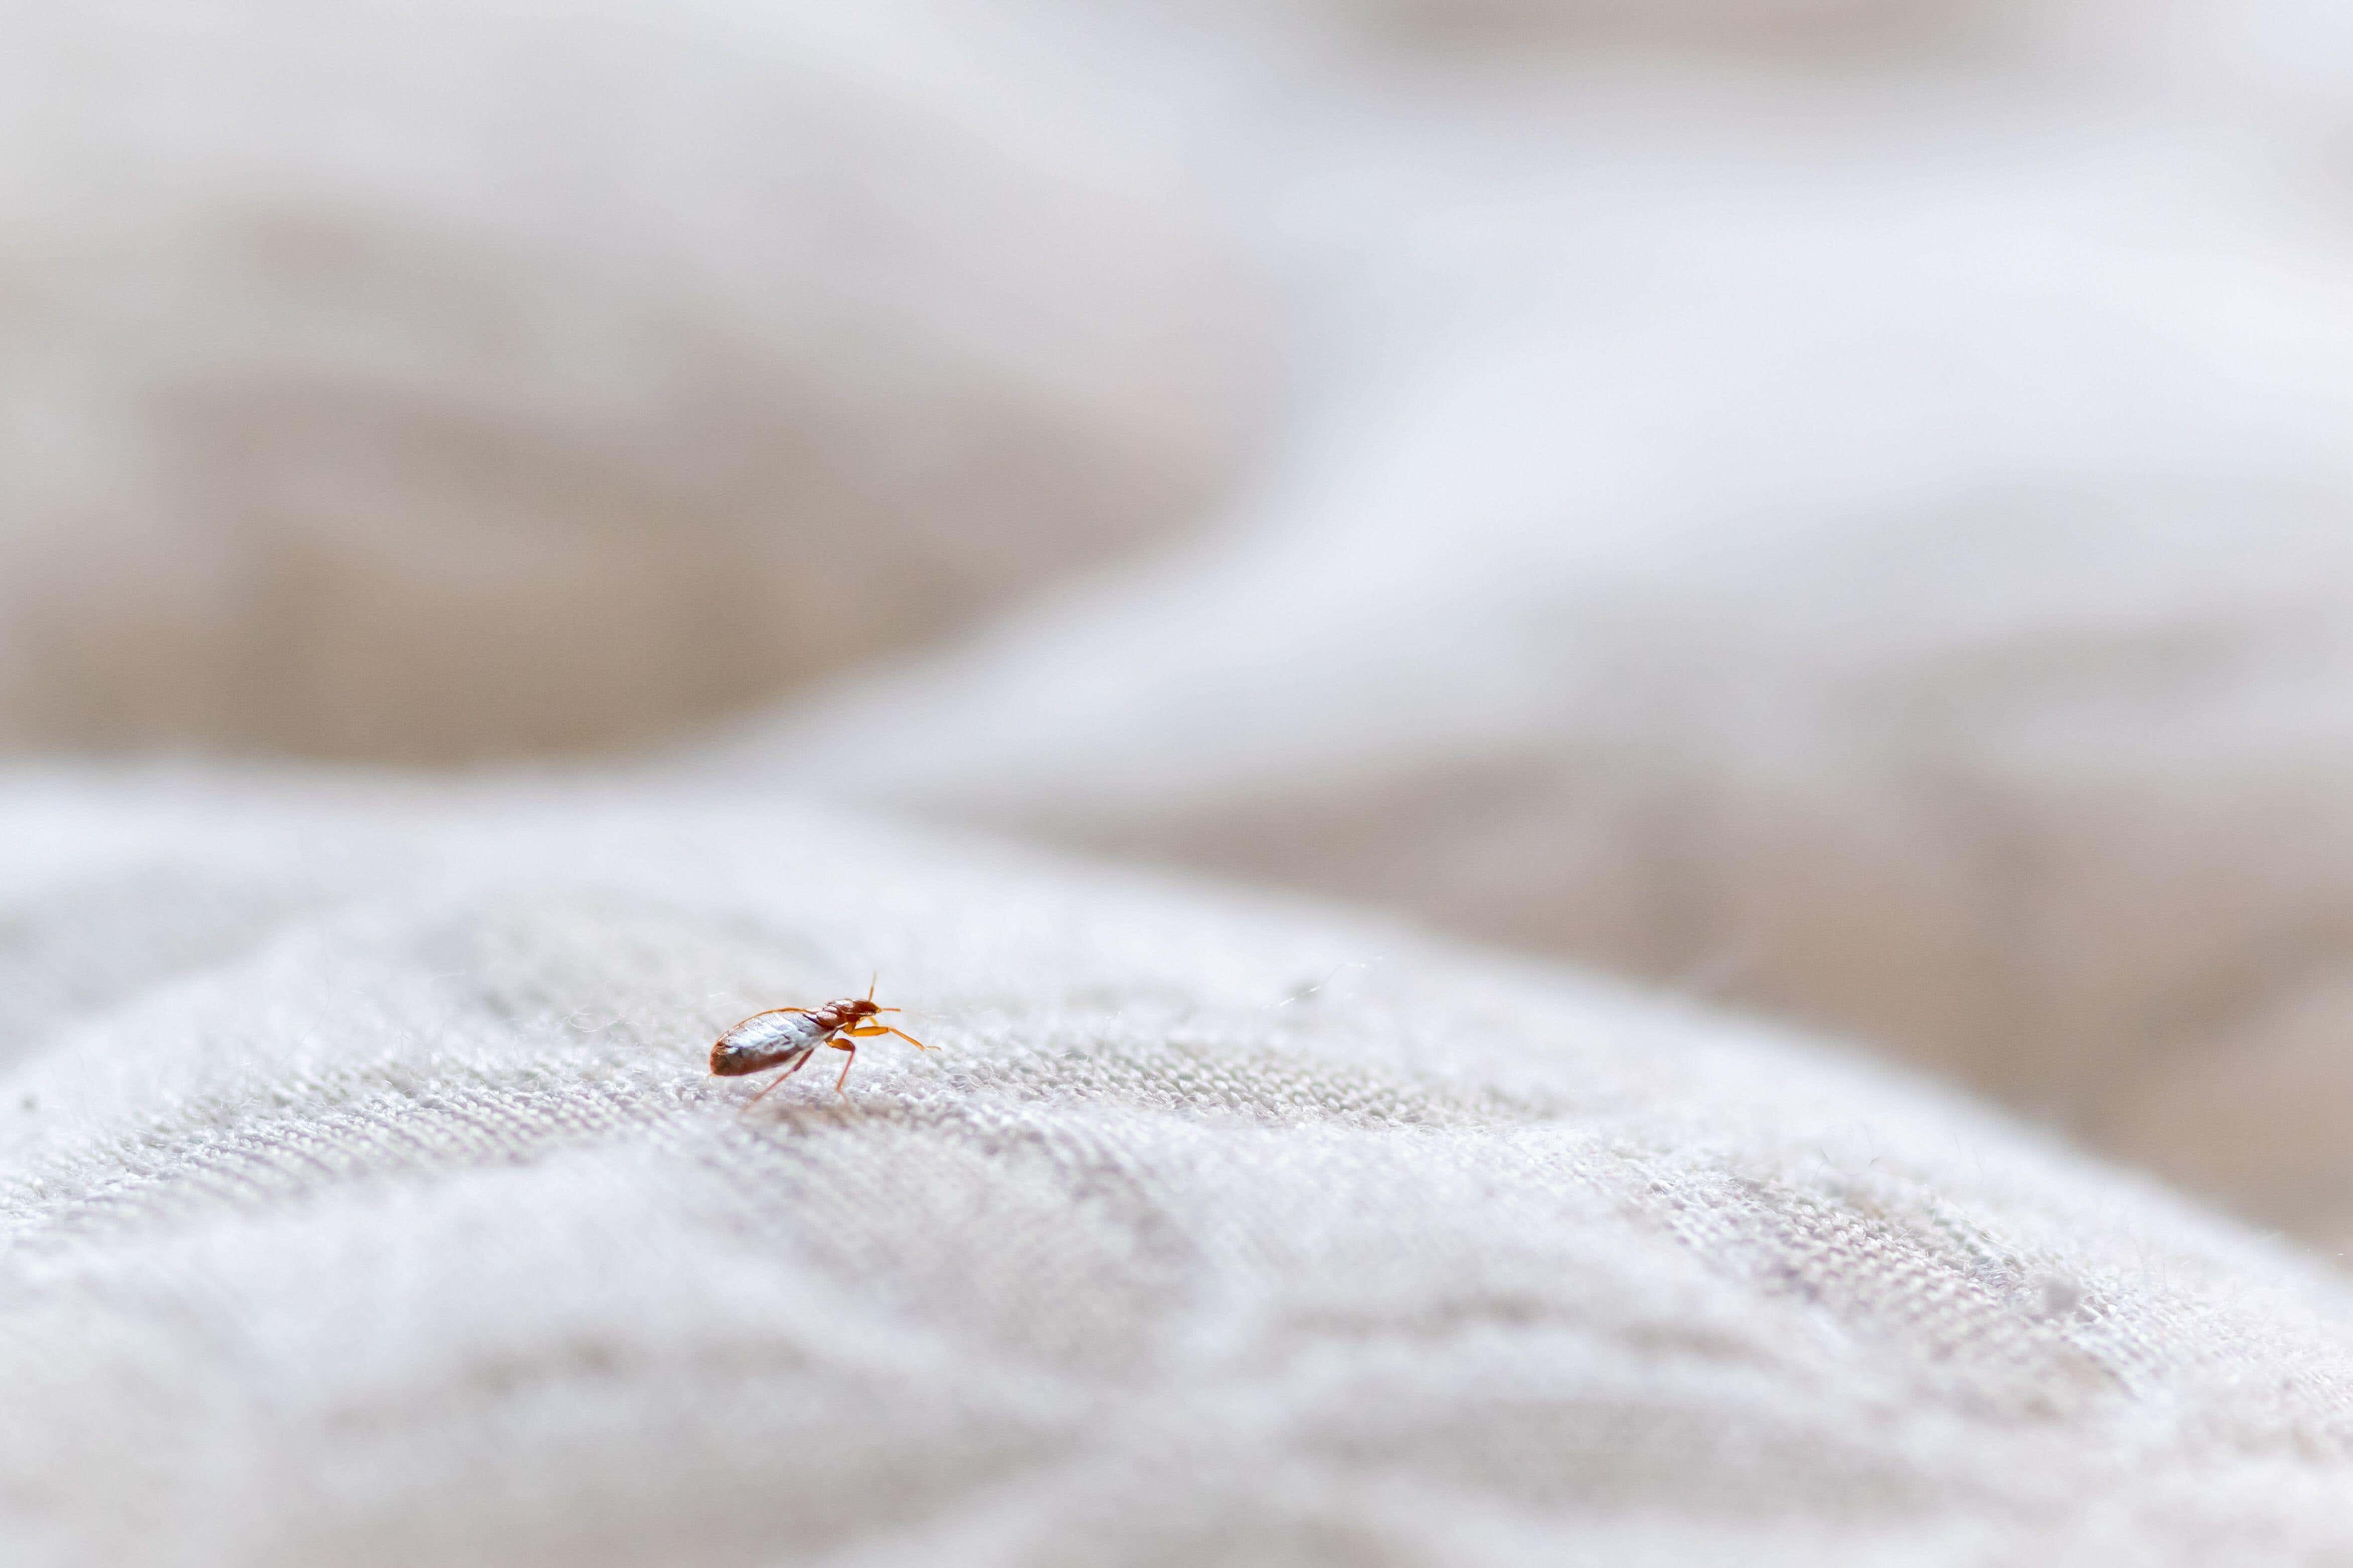 A library in west London has temporarily closed after bedbugs were found (File image/Alamy/PA)